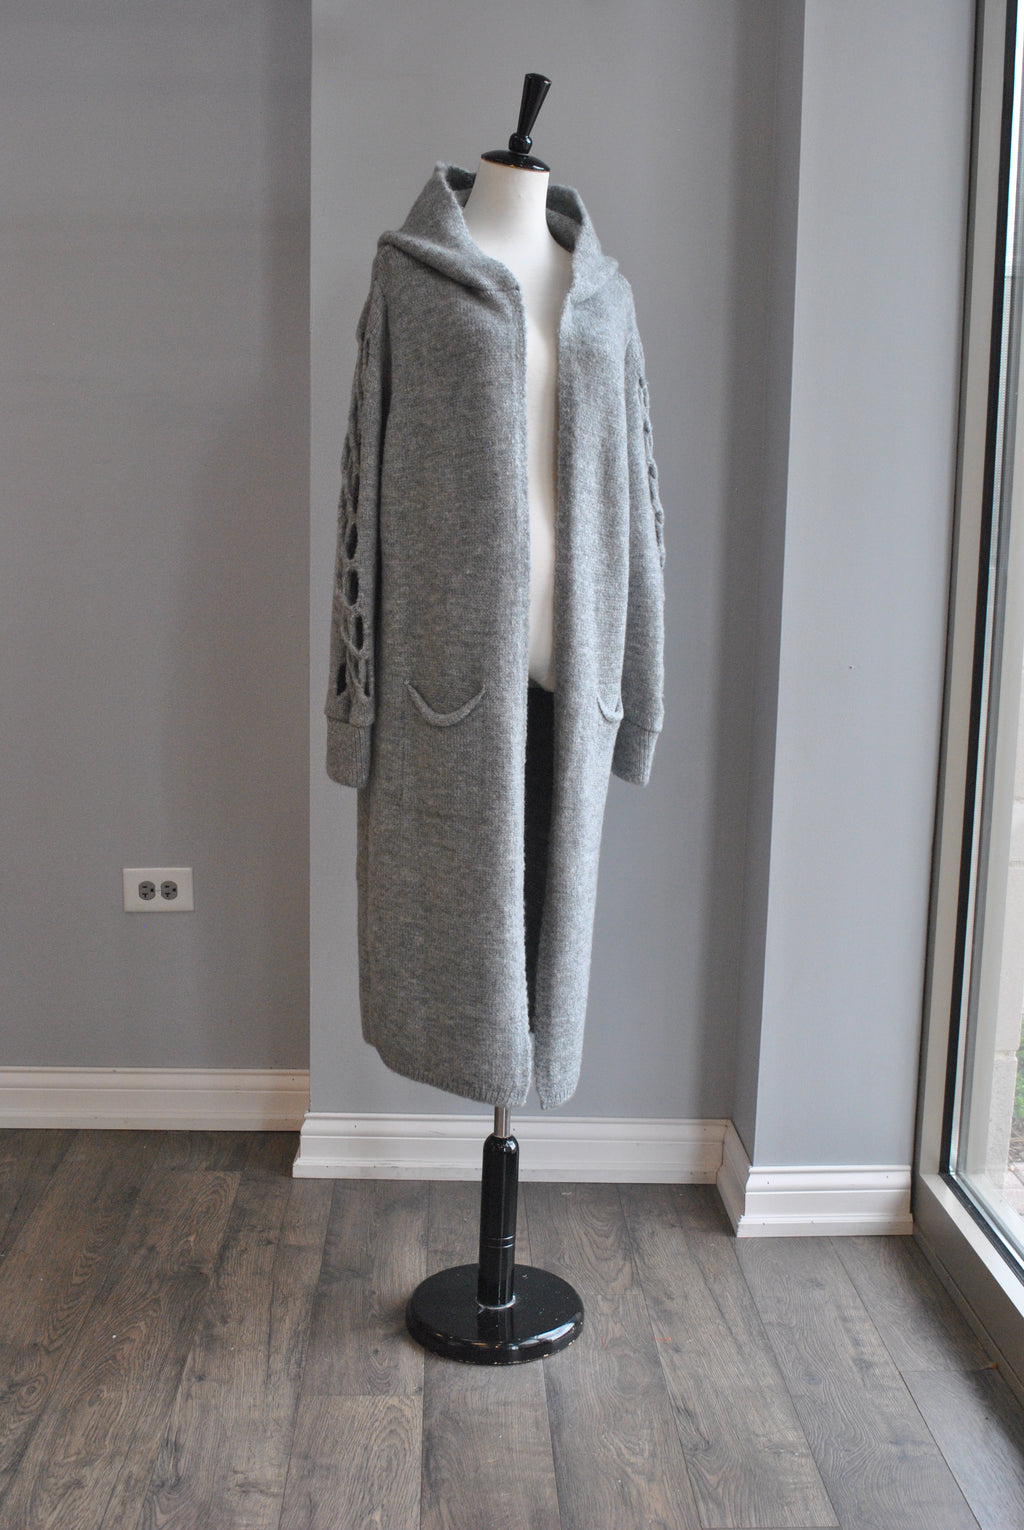 GREY OPEN STYLE LONG SWEATER CARDIGAN WITH A HOODIE AND STATEMENT SLEEVES